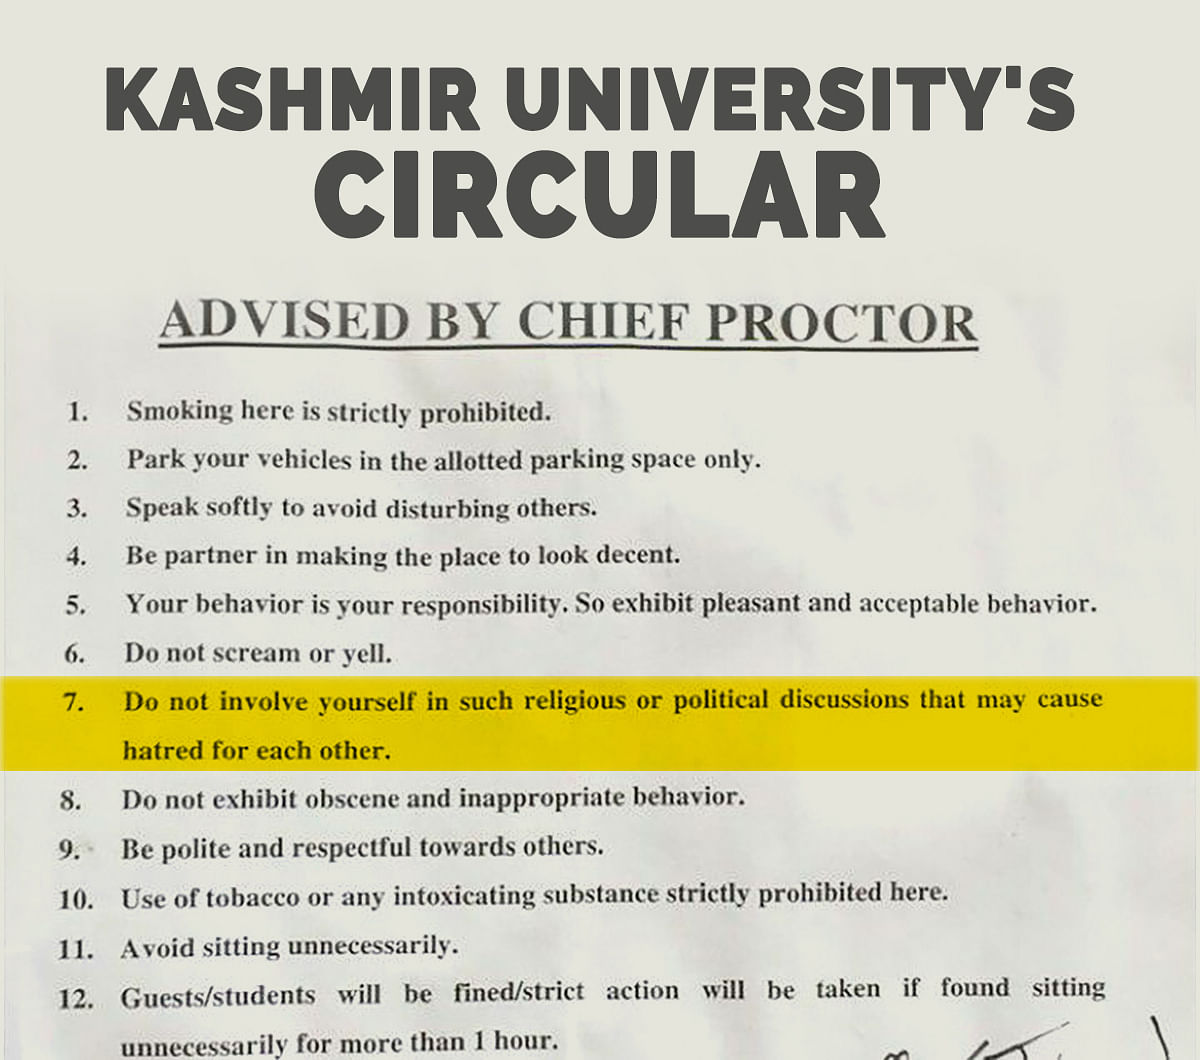 The circular, released by the university’s Chief Proctor’s office, has made bizarre demands of the students. 